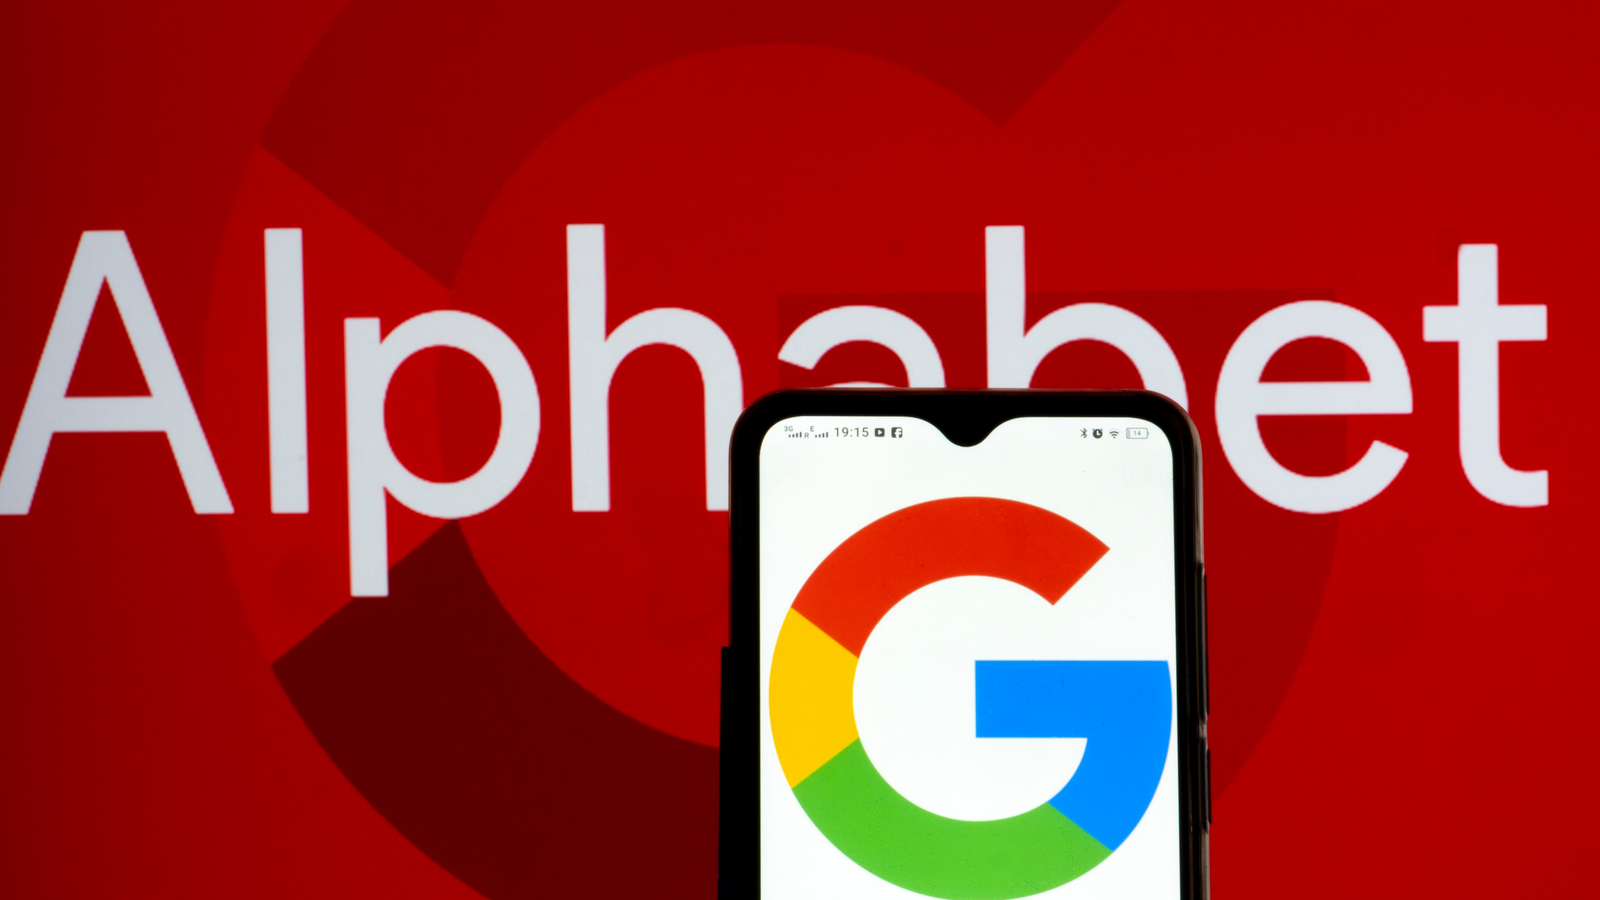 GOOGL stock: 3 good reasons to buy Alphabet while it’s on sale